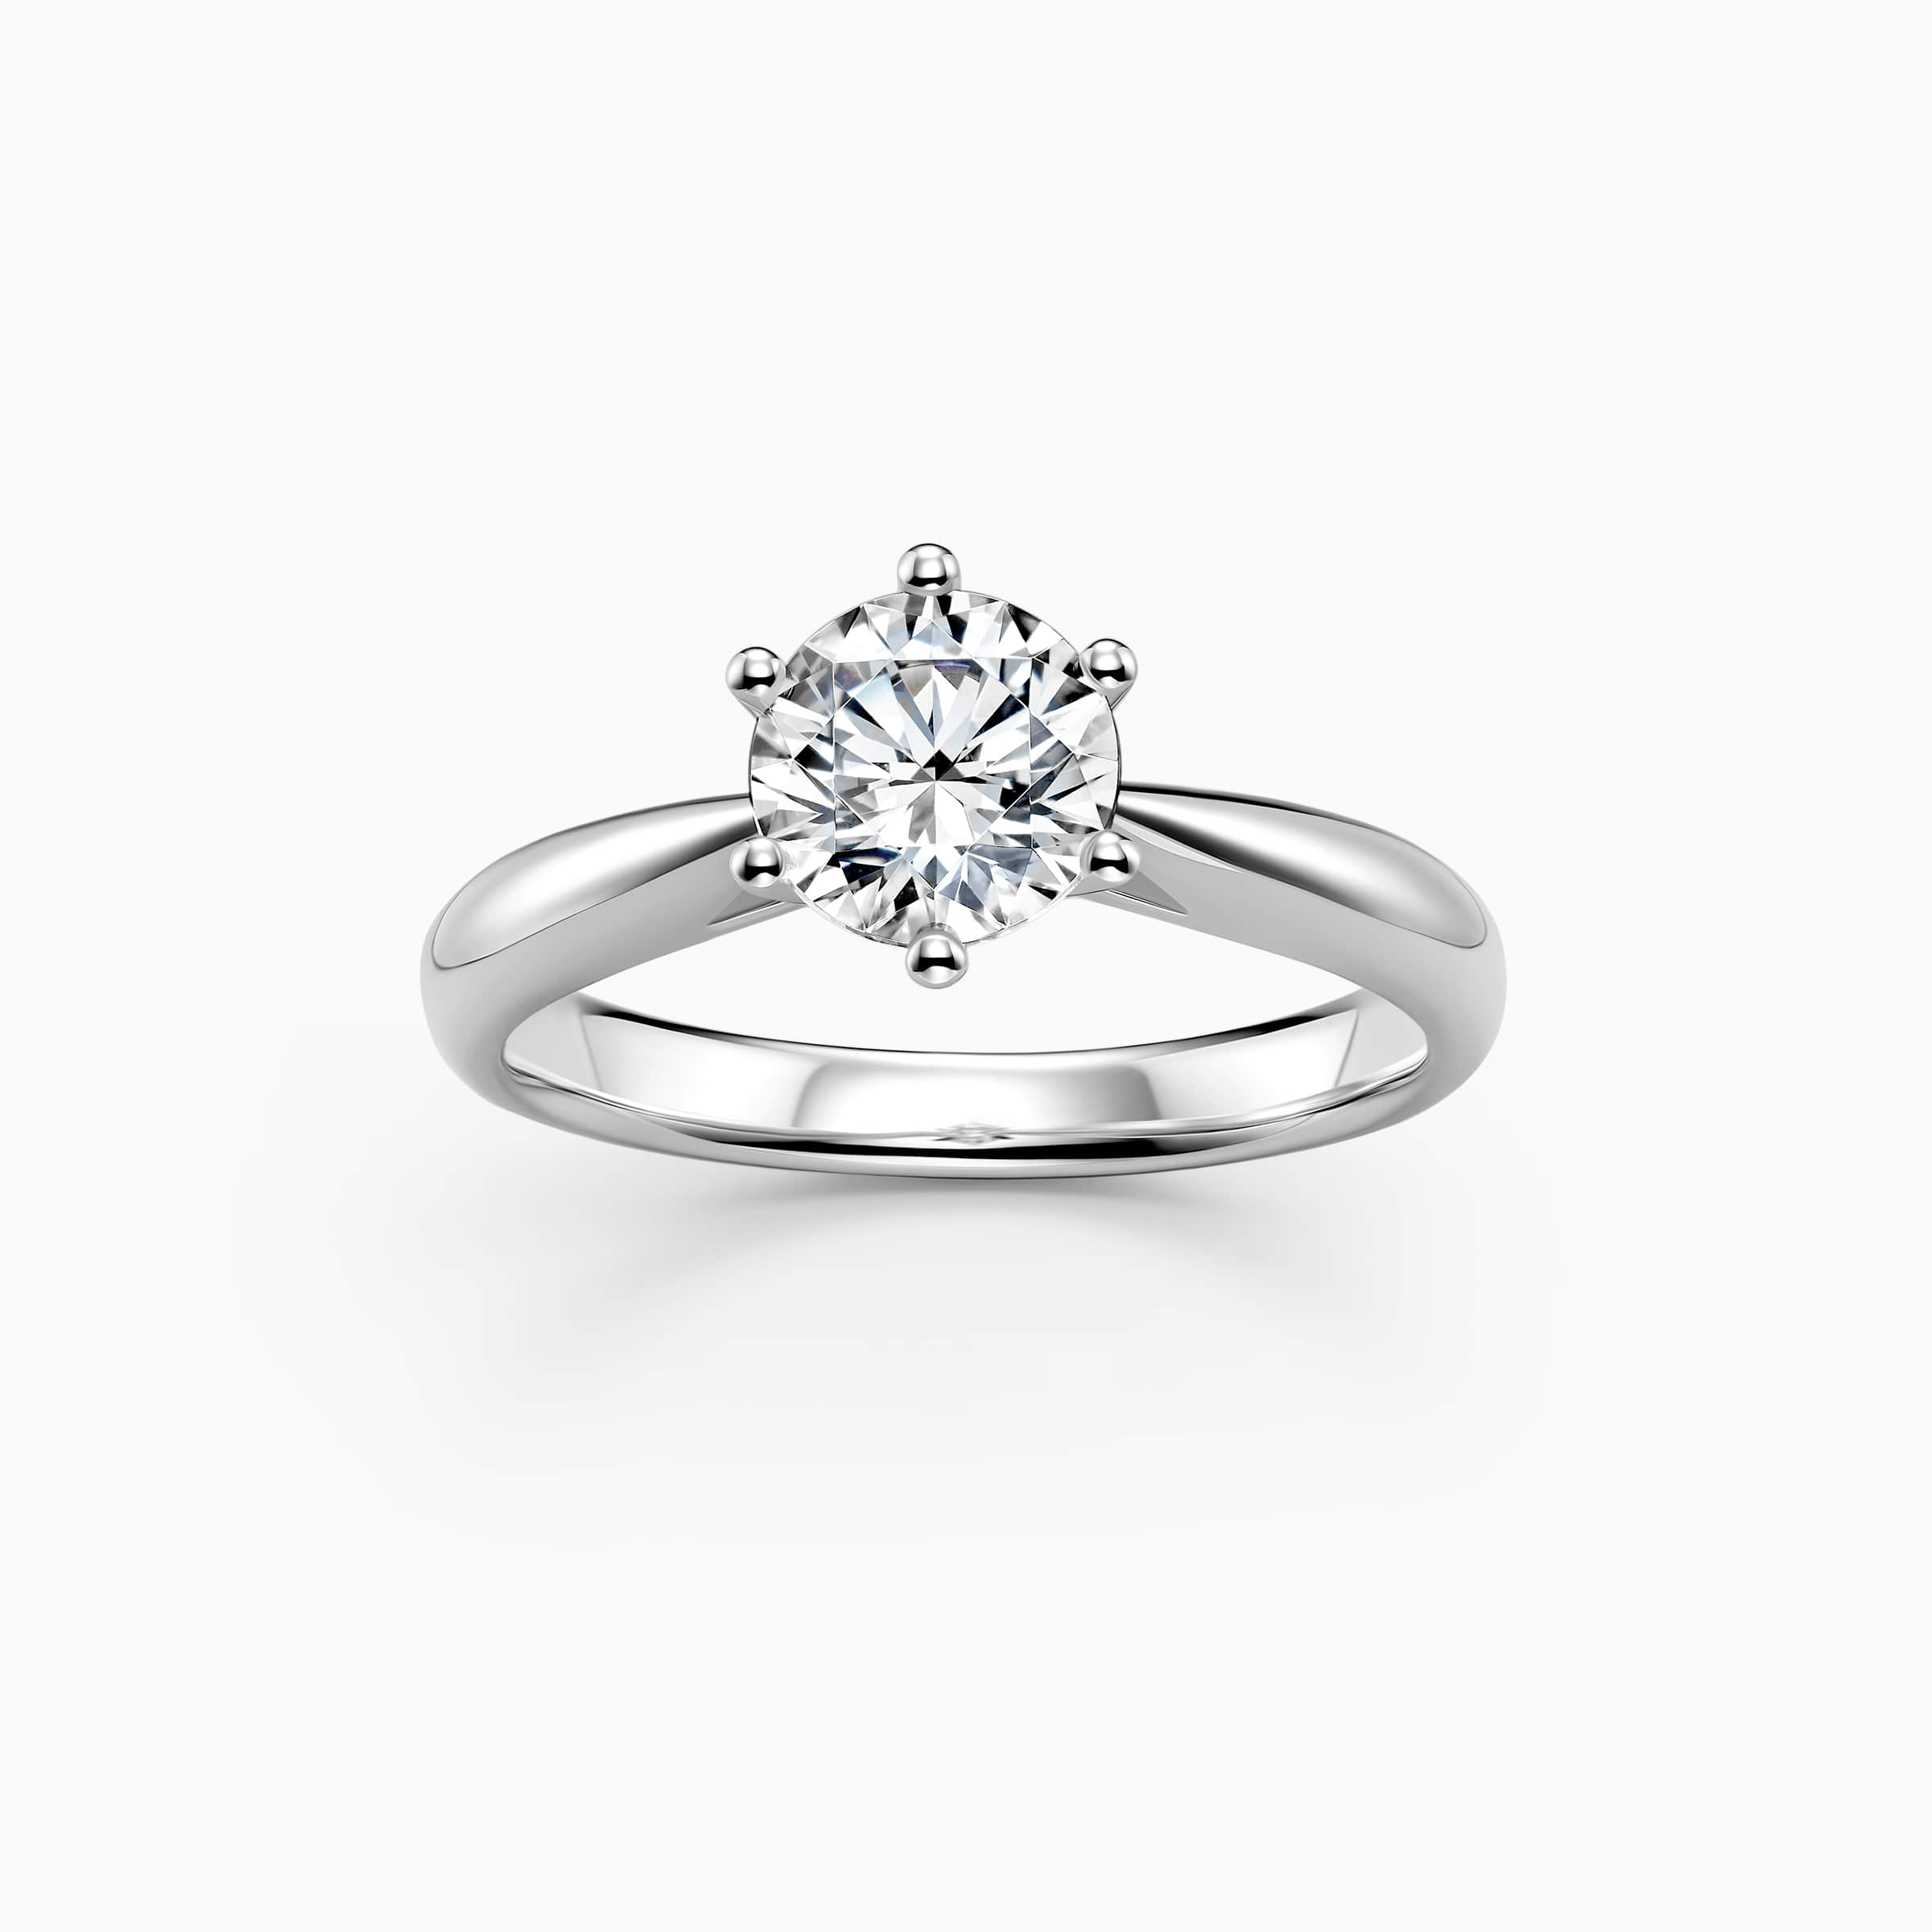 Darry Ring round solitaire ring